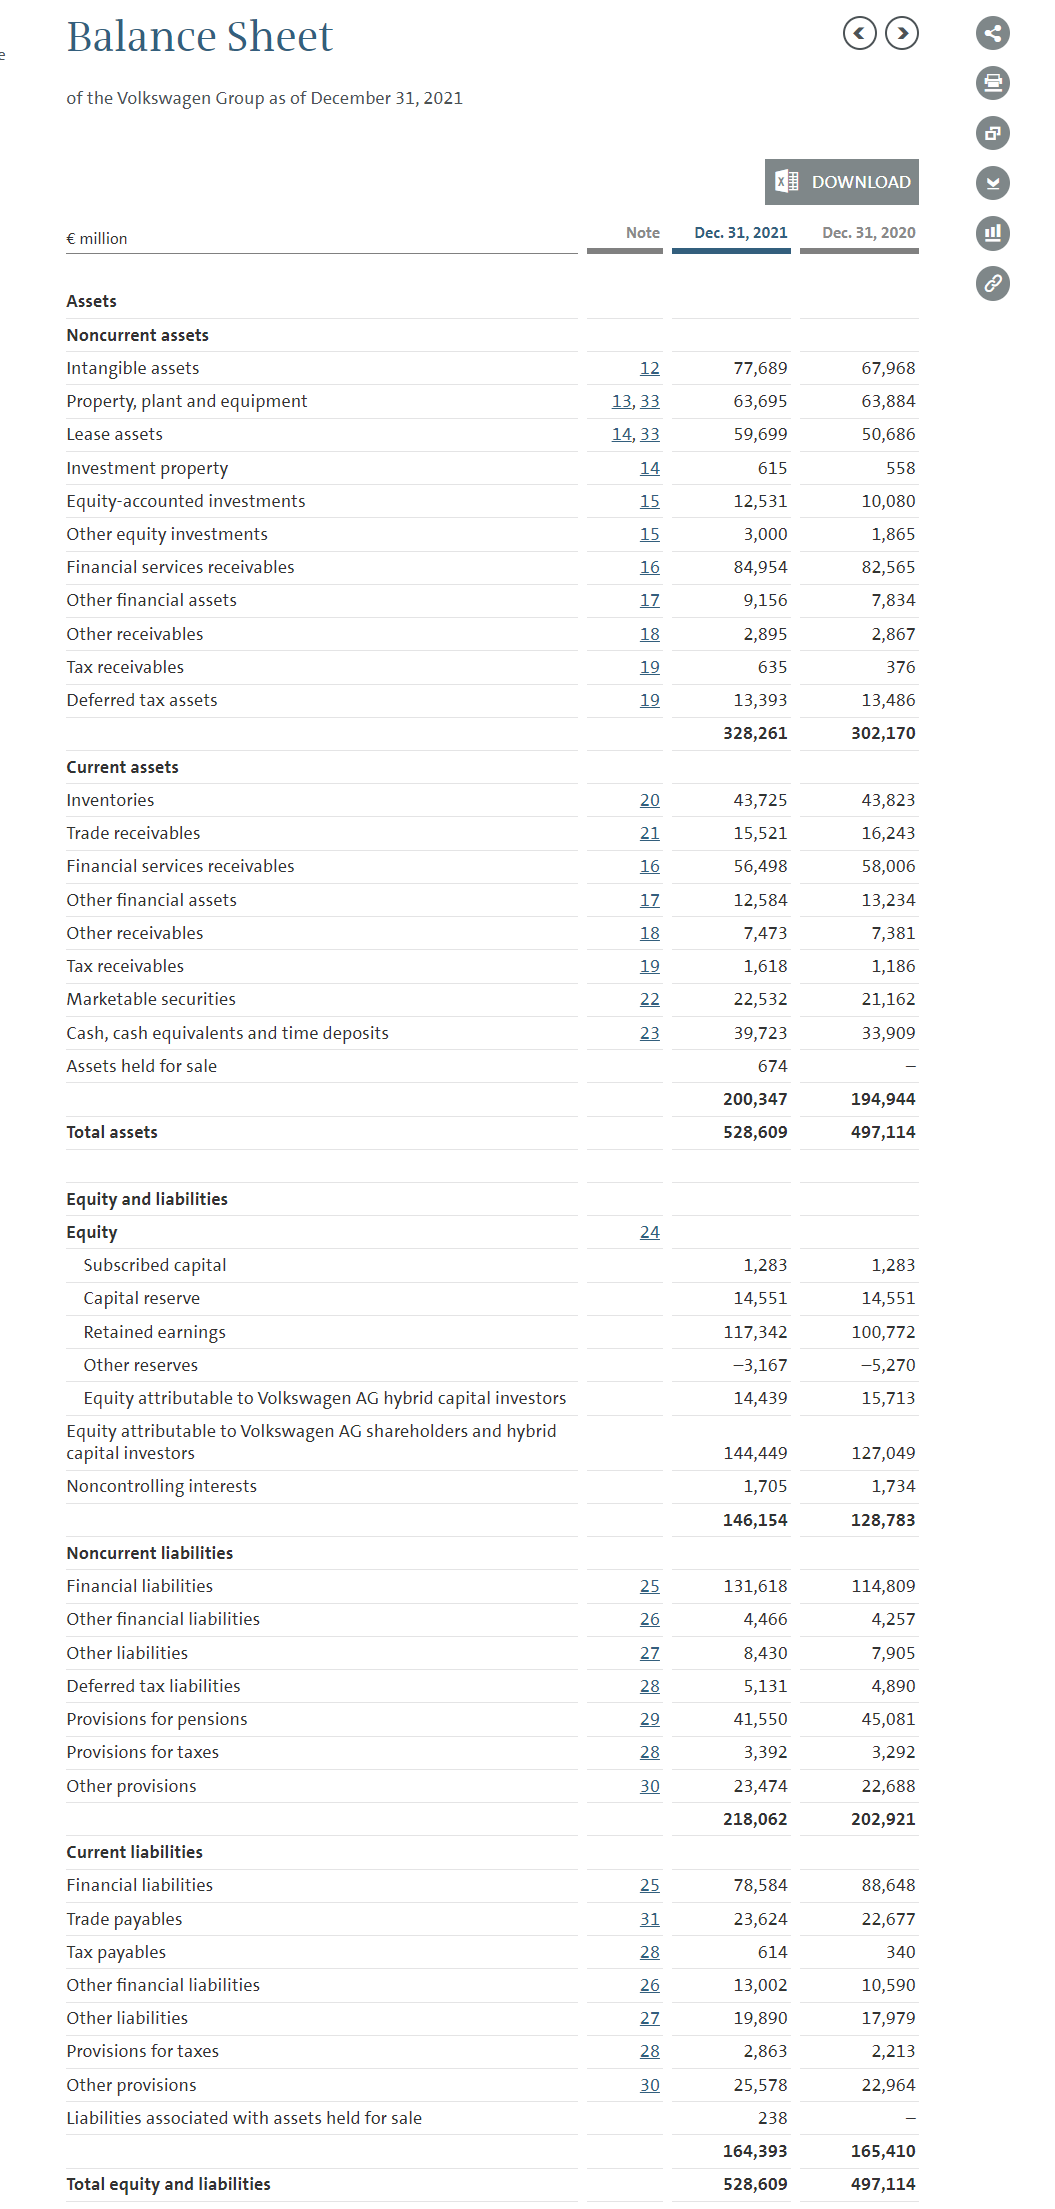 Using Volkswagen balance sheet as an example to show the GAAP vs IFRS balance sheet differences